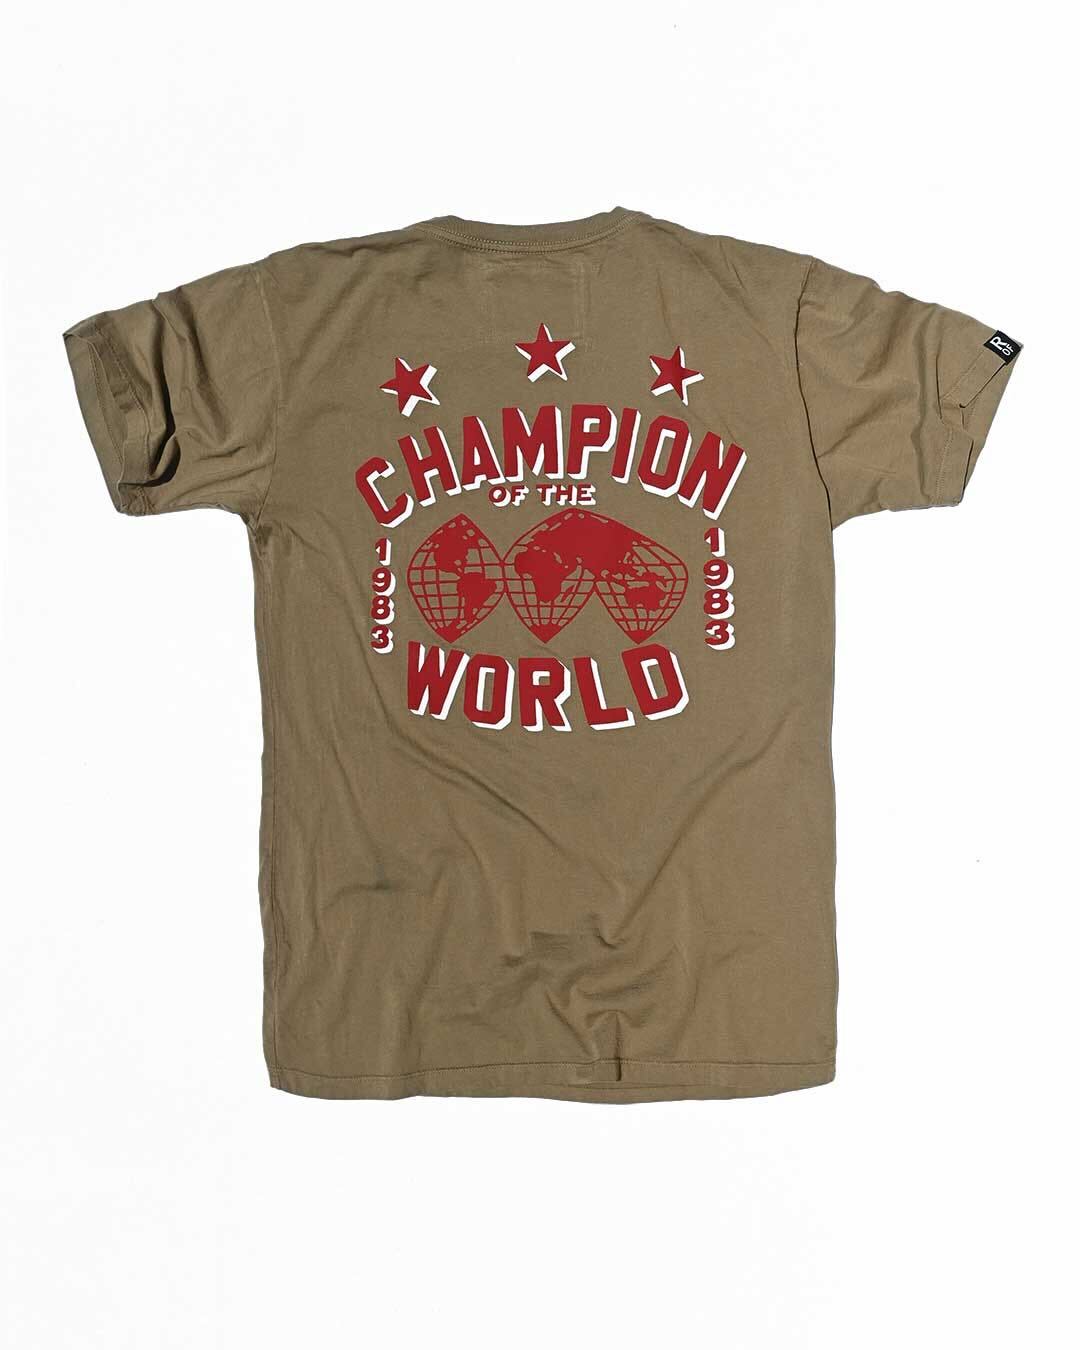 The Iron Sheik 1983 Champ Olive Tee - Roots of Fight Canada